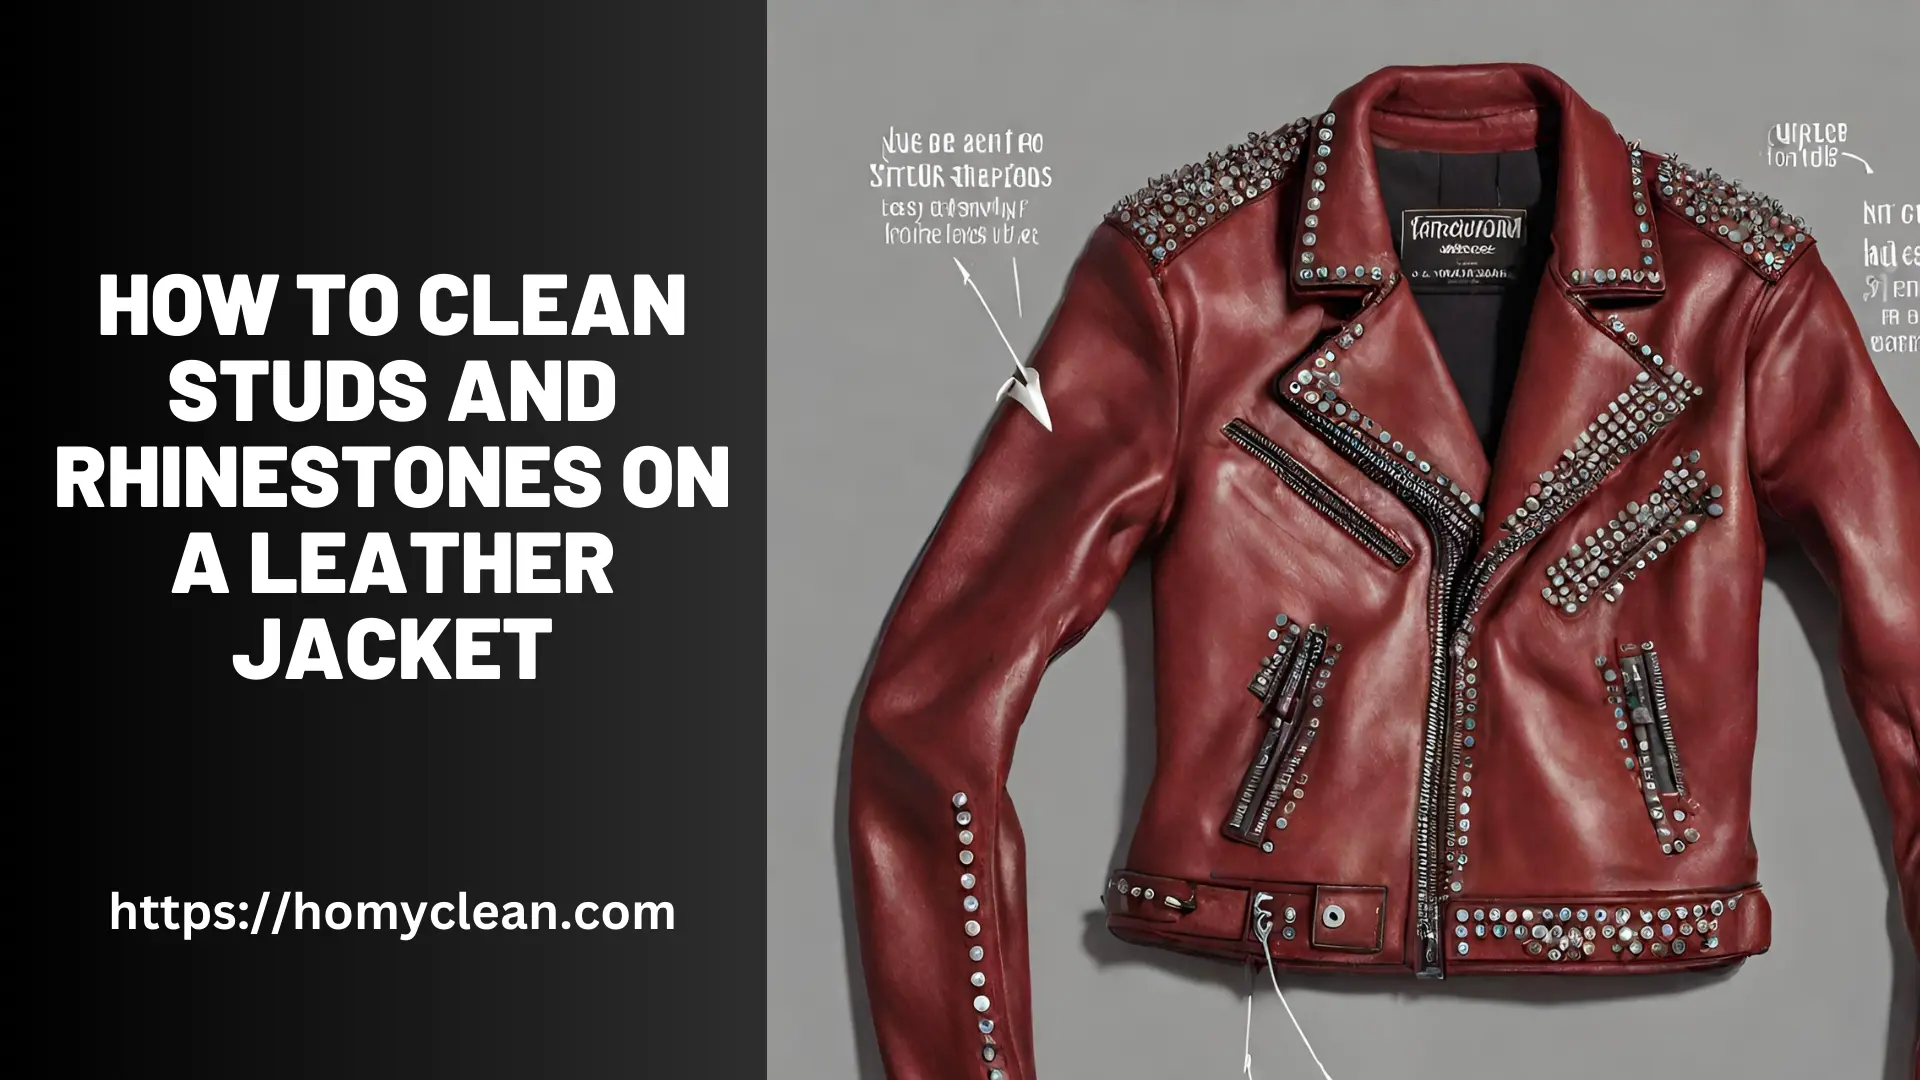 How to Clean Studs and Rhinestones on a Leather Jacket